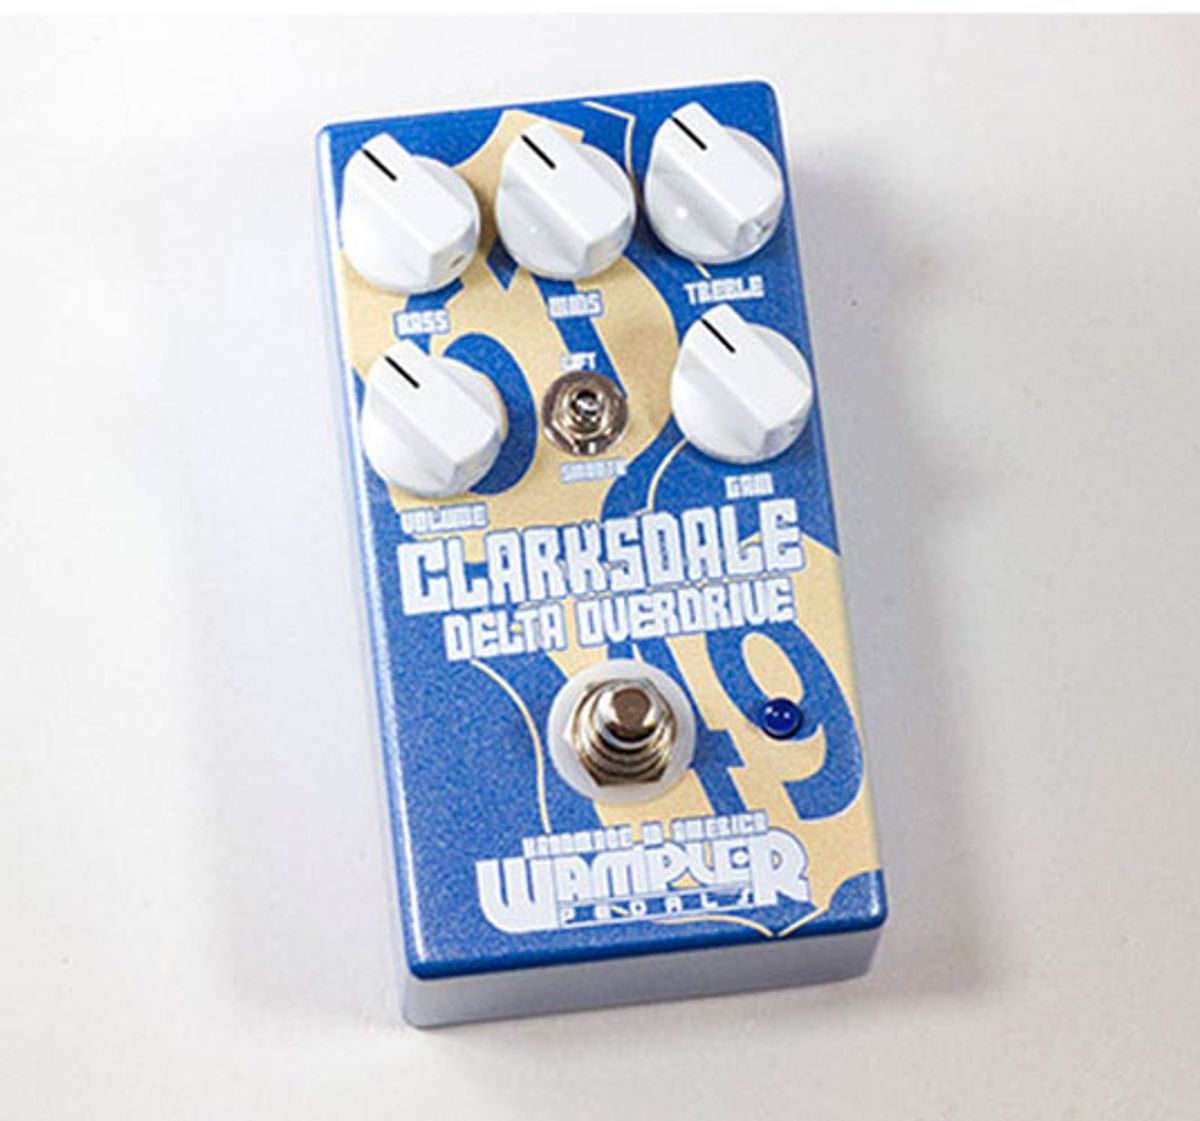 Wampler Pedals Introduces the Clarksdale Overdrive